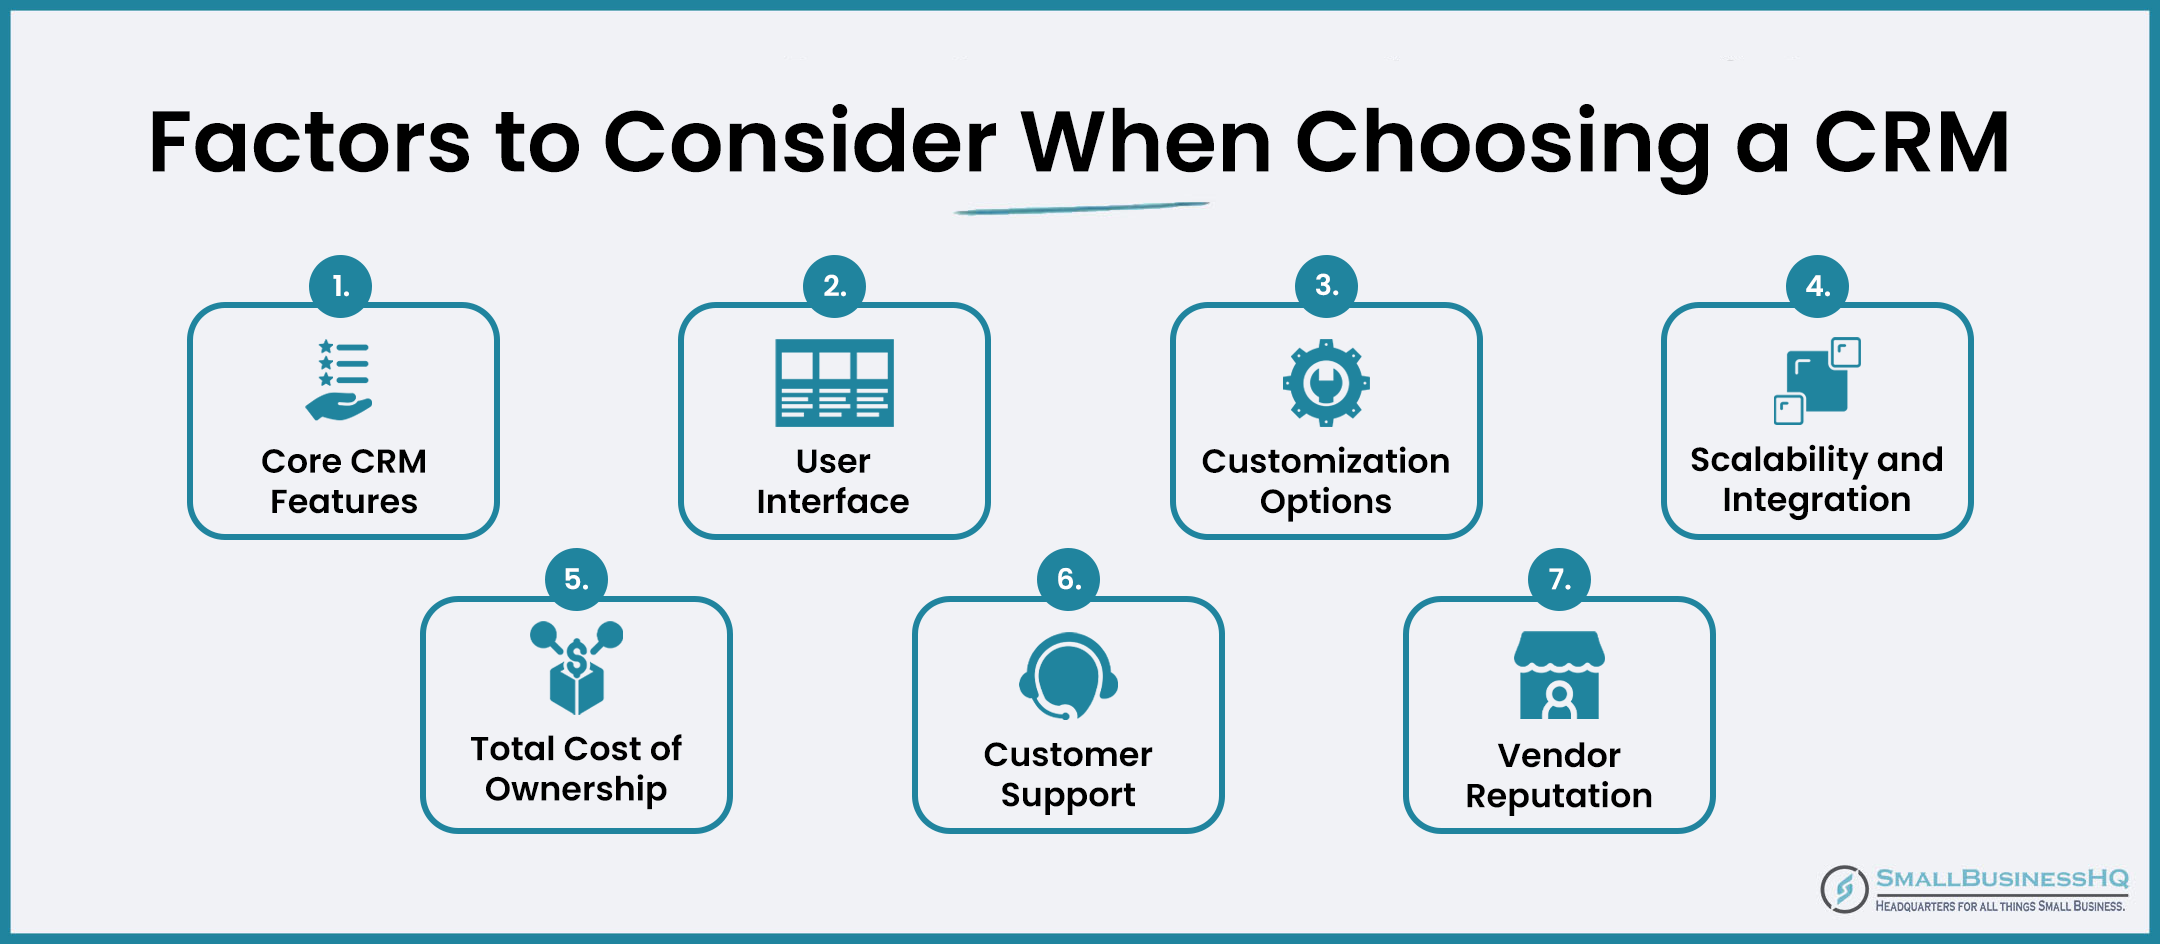 Factors to Consider When Choosing a CRM